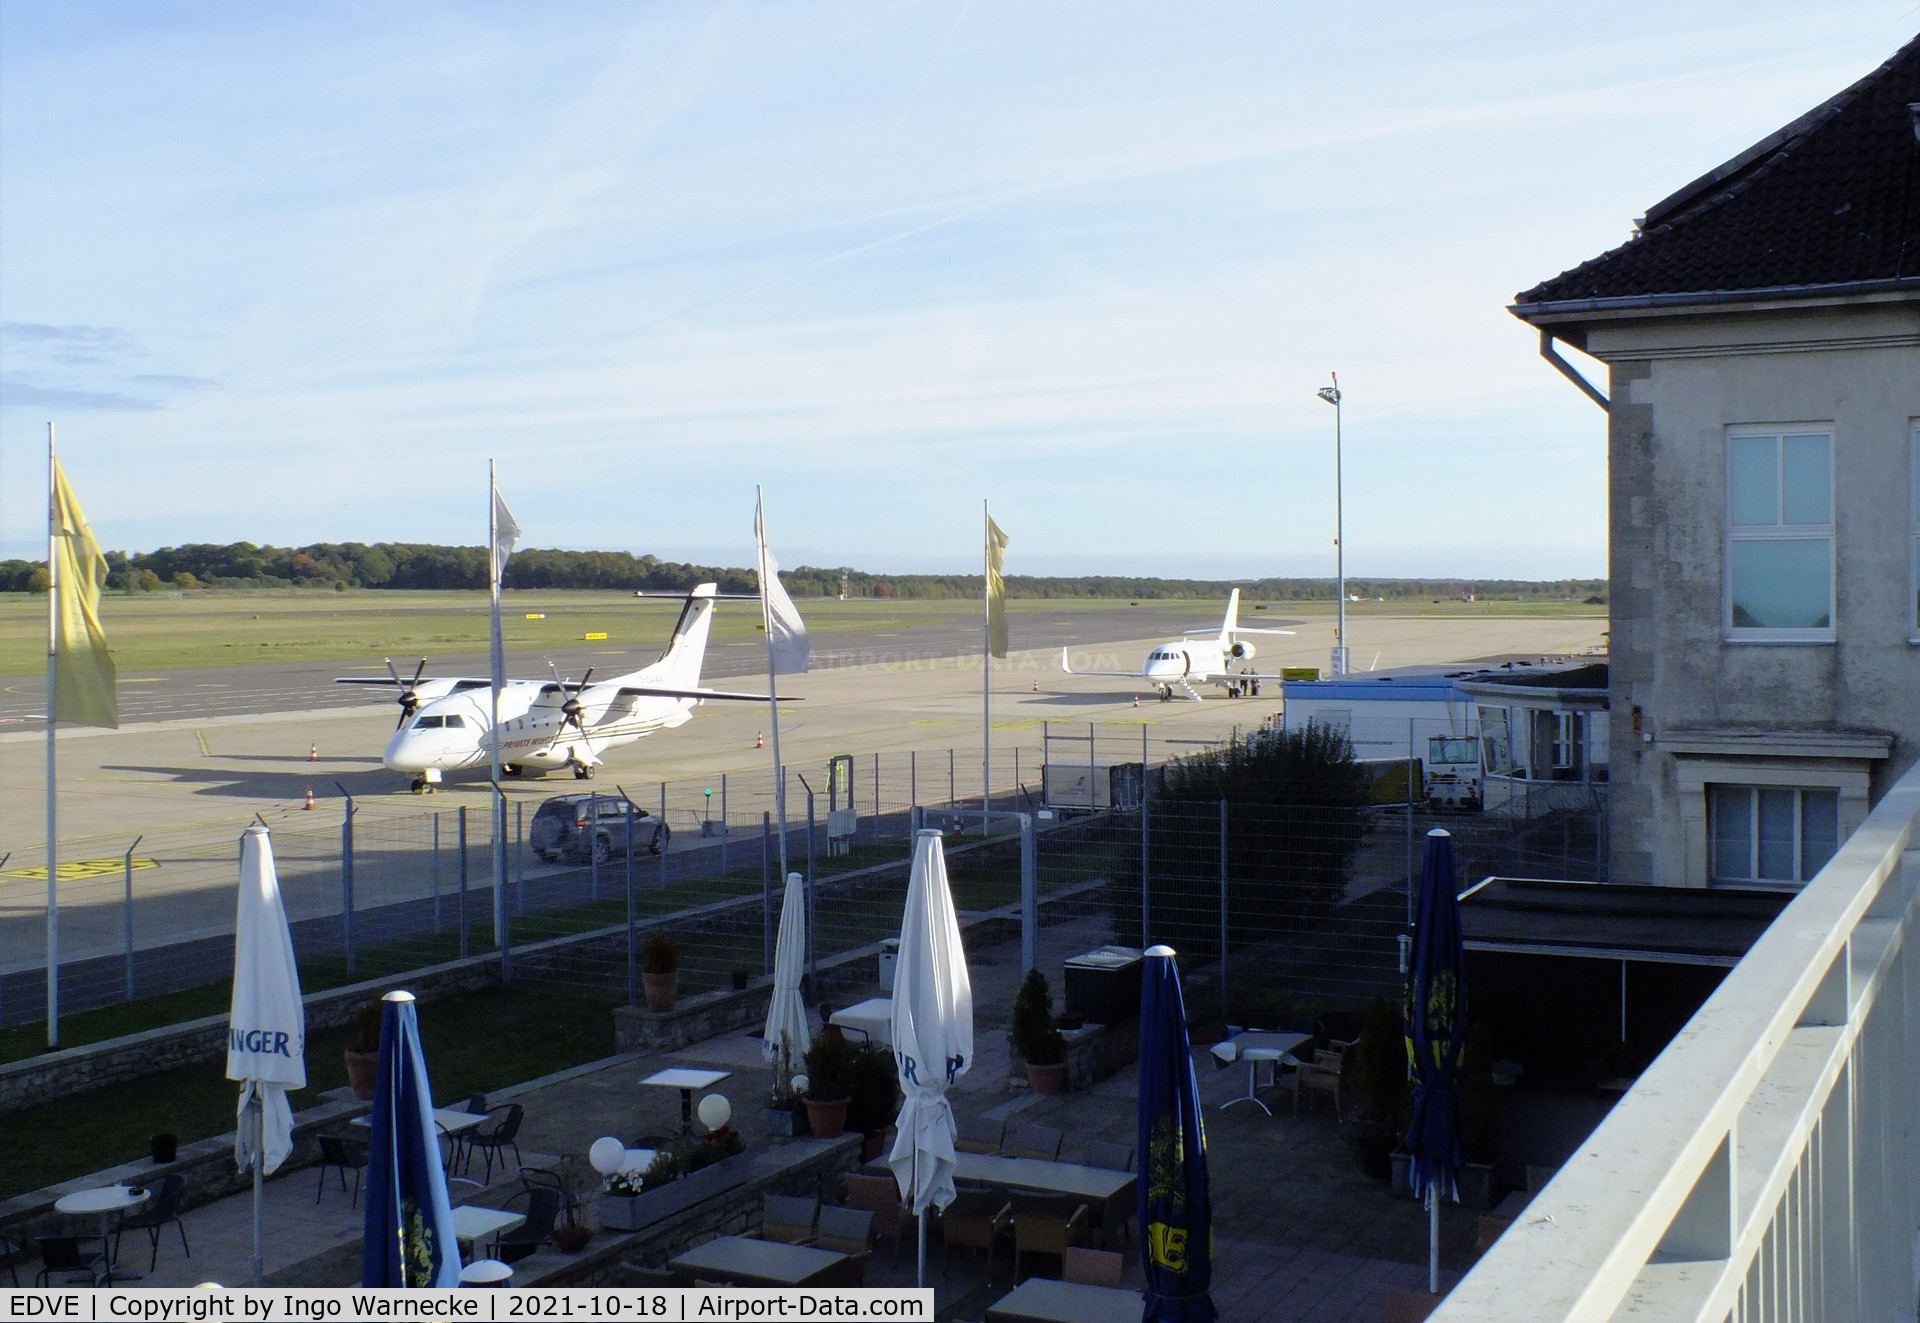 Braunschweig-Wolfsburg Regional Airport, Braunschweig, Lower Saxony Germany (EDVE) - looking east from the visitors gallery at the apron at Braunschweig-Waggum airport